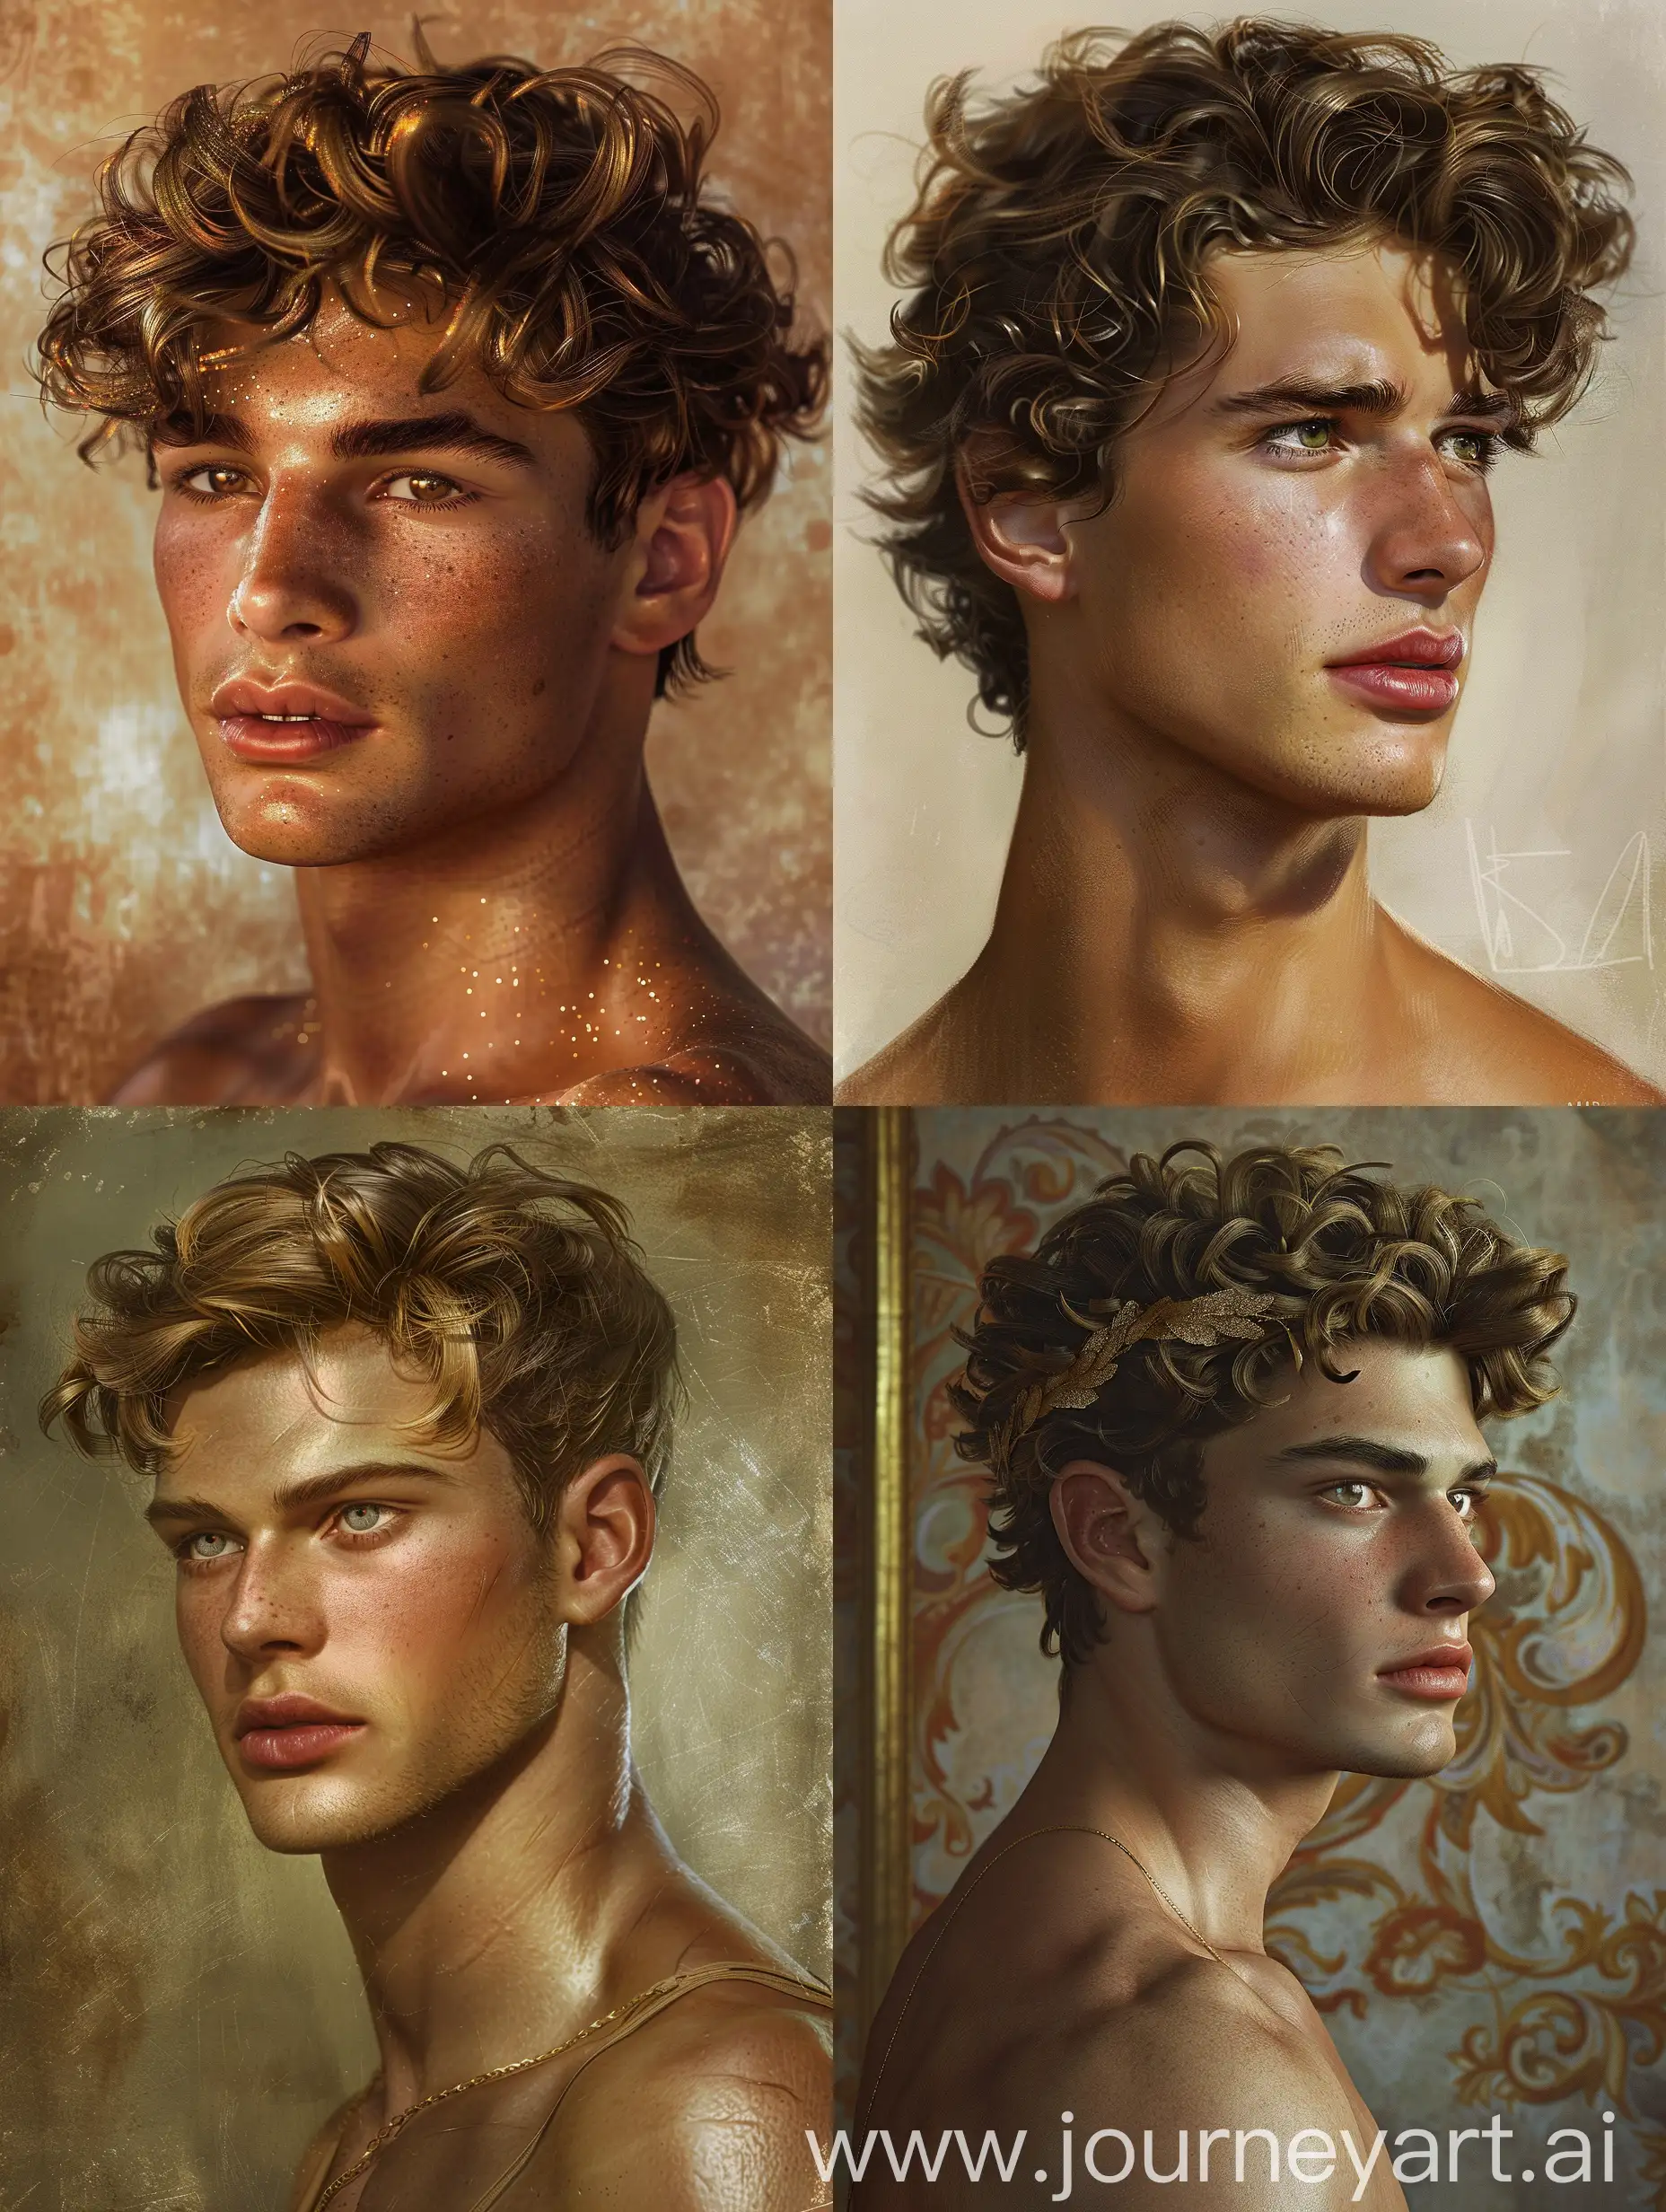 Subject: very waist up very photorealistic rendering 20k digital canvas artwork heavy pixilated very detailed very descriptive good painting and sculpting with professional hands. 

A supernatural god as a young man. 

Tan, tall, lean, handsome, golden brown hair. 